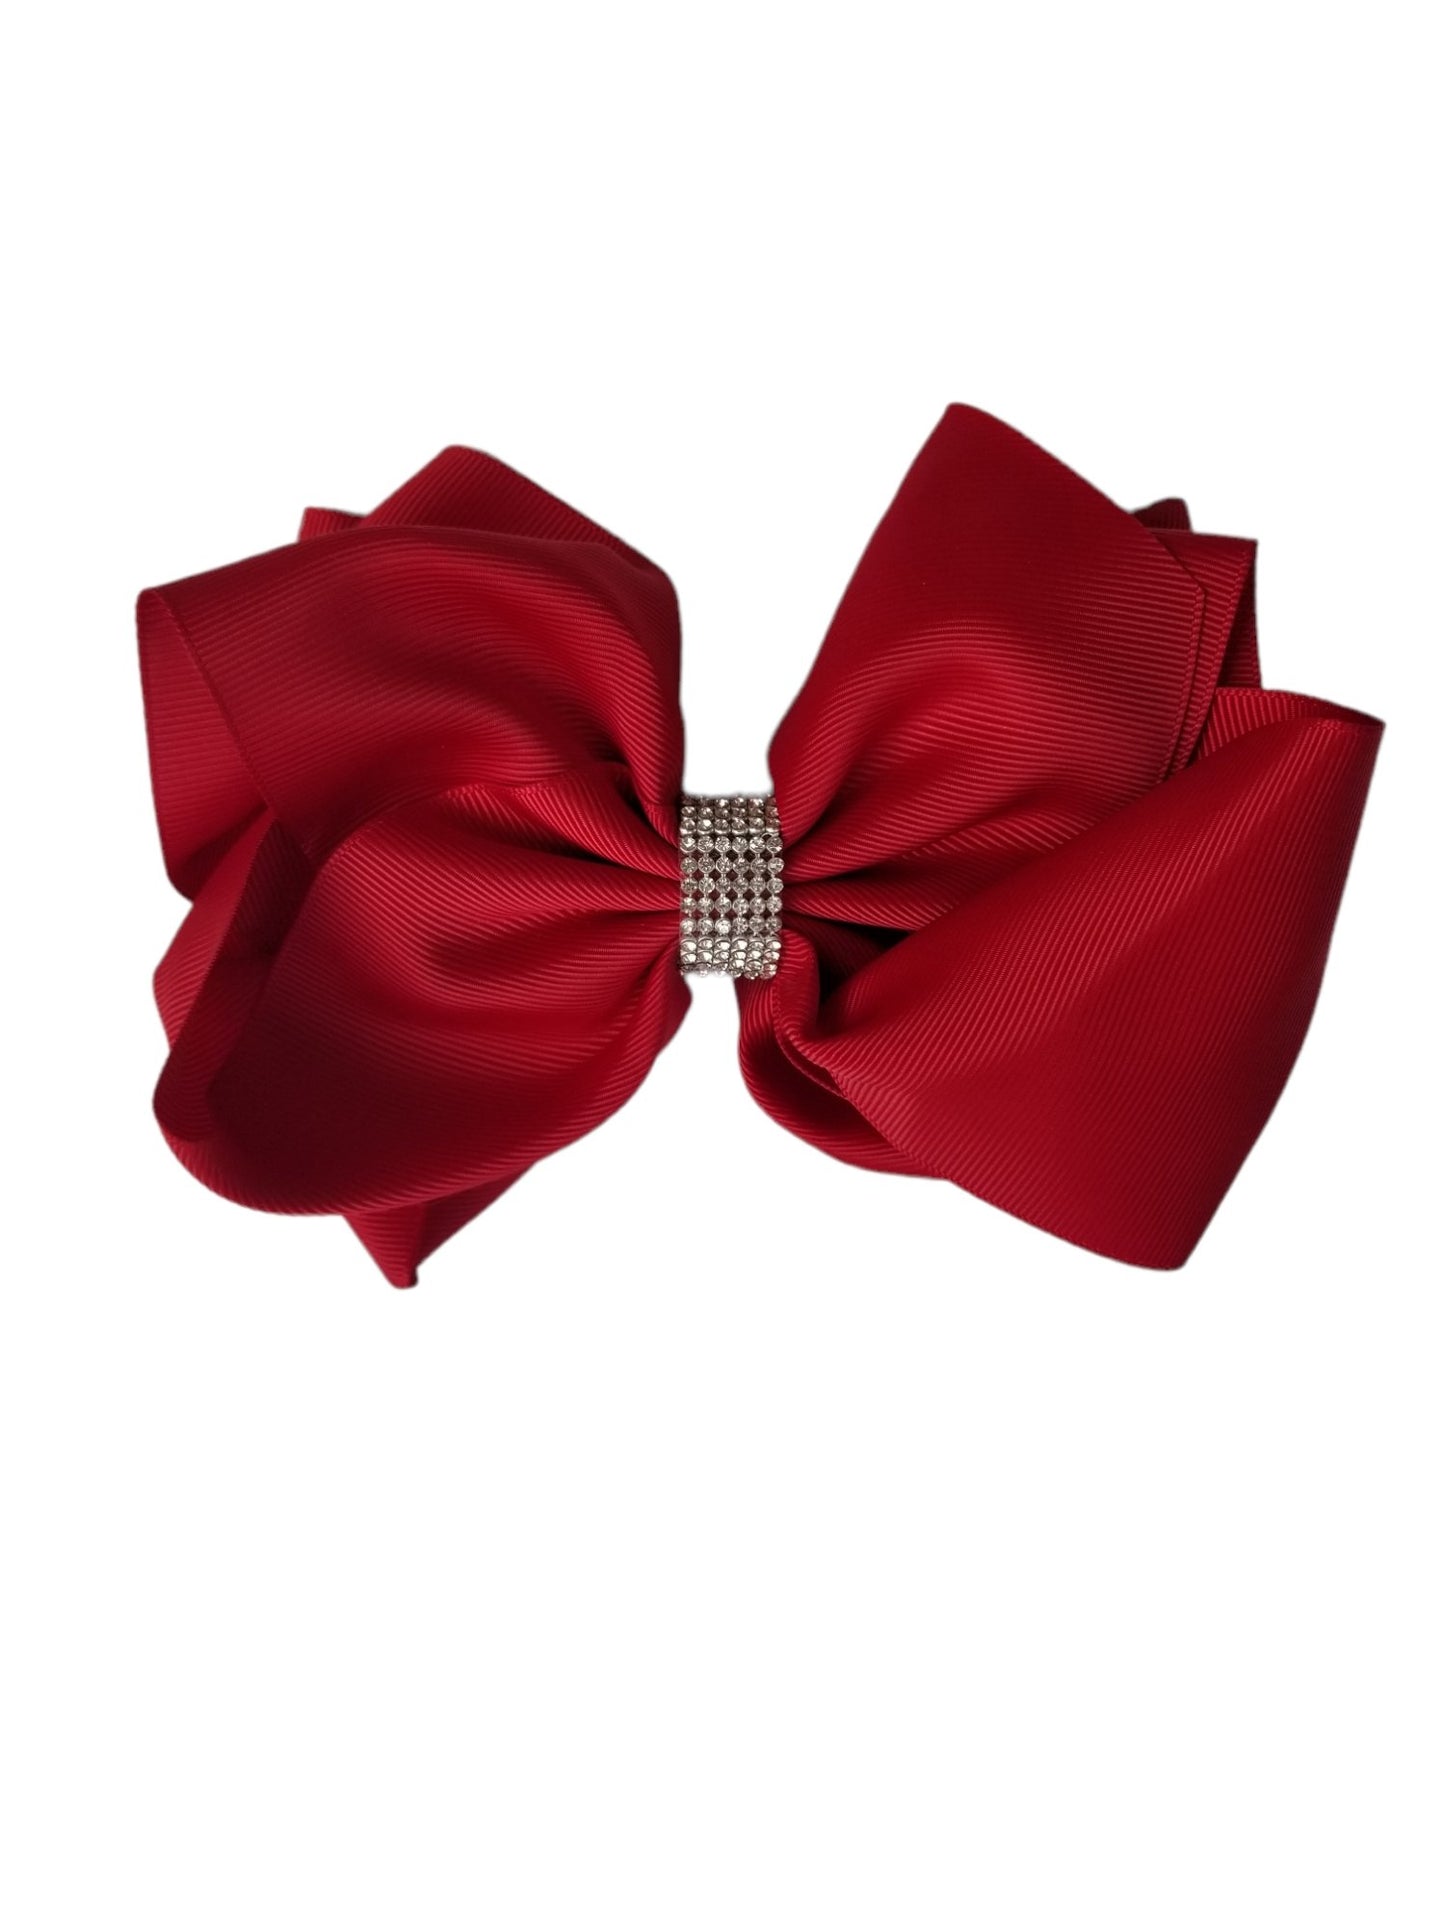 Large Crimson Red Hair Bow with Bling